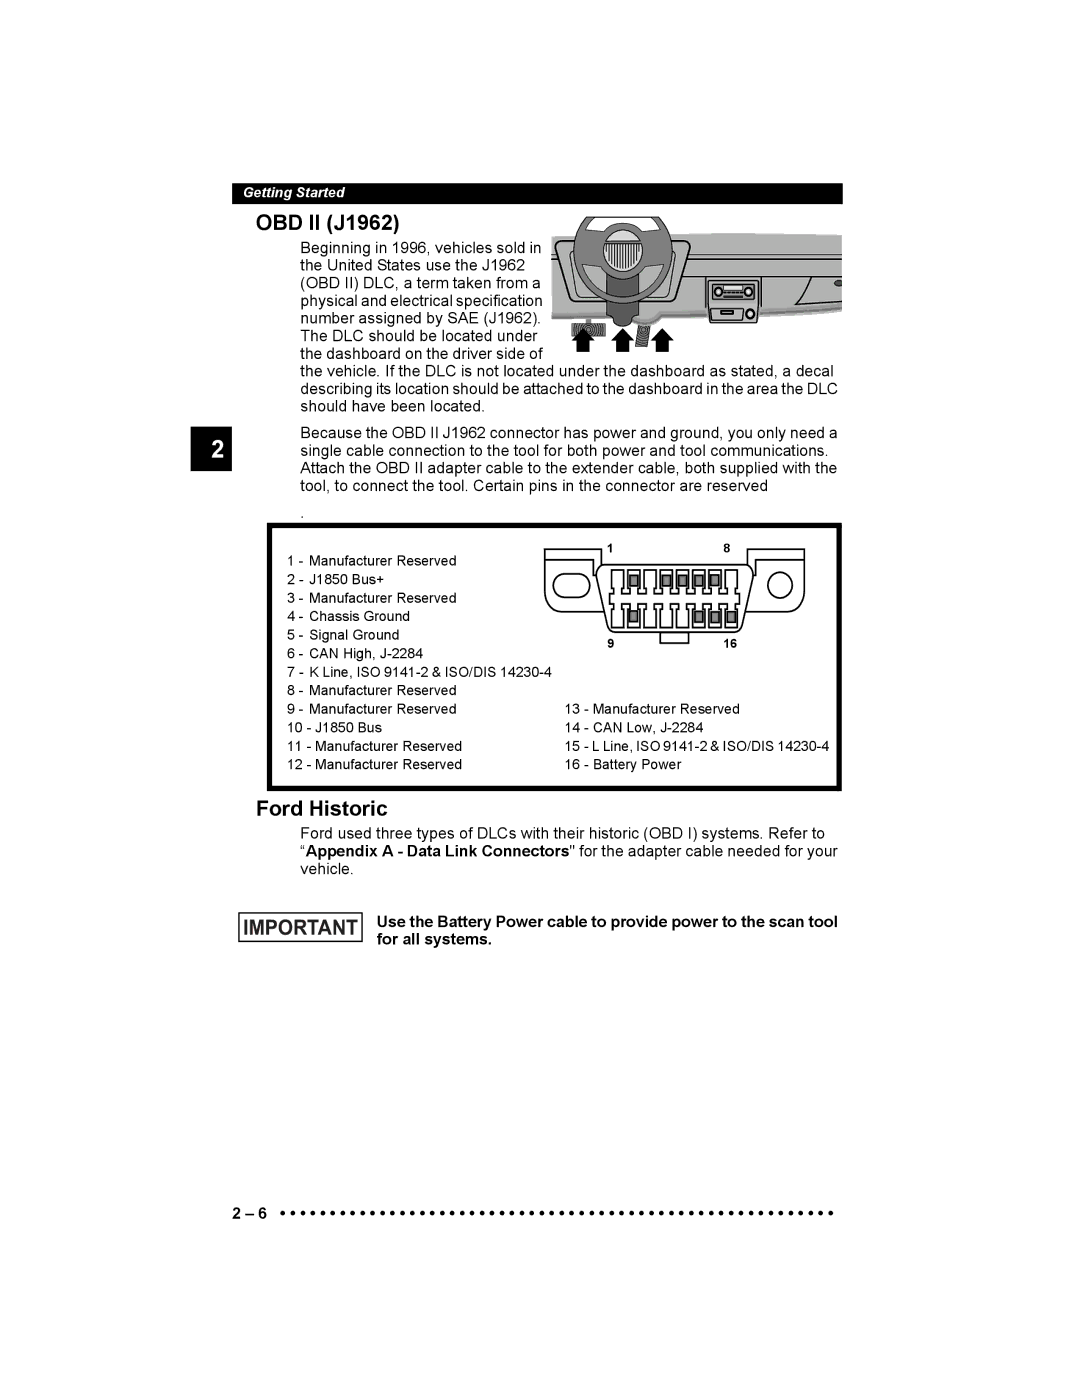 Actron 9640 user manual OBD II J1962, Ford Historic 